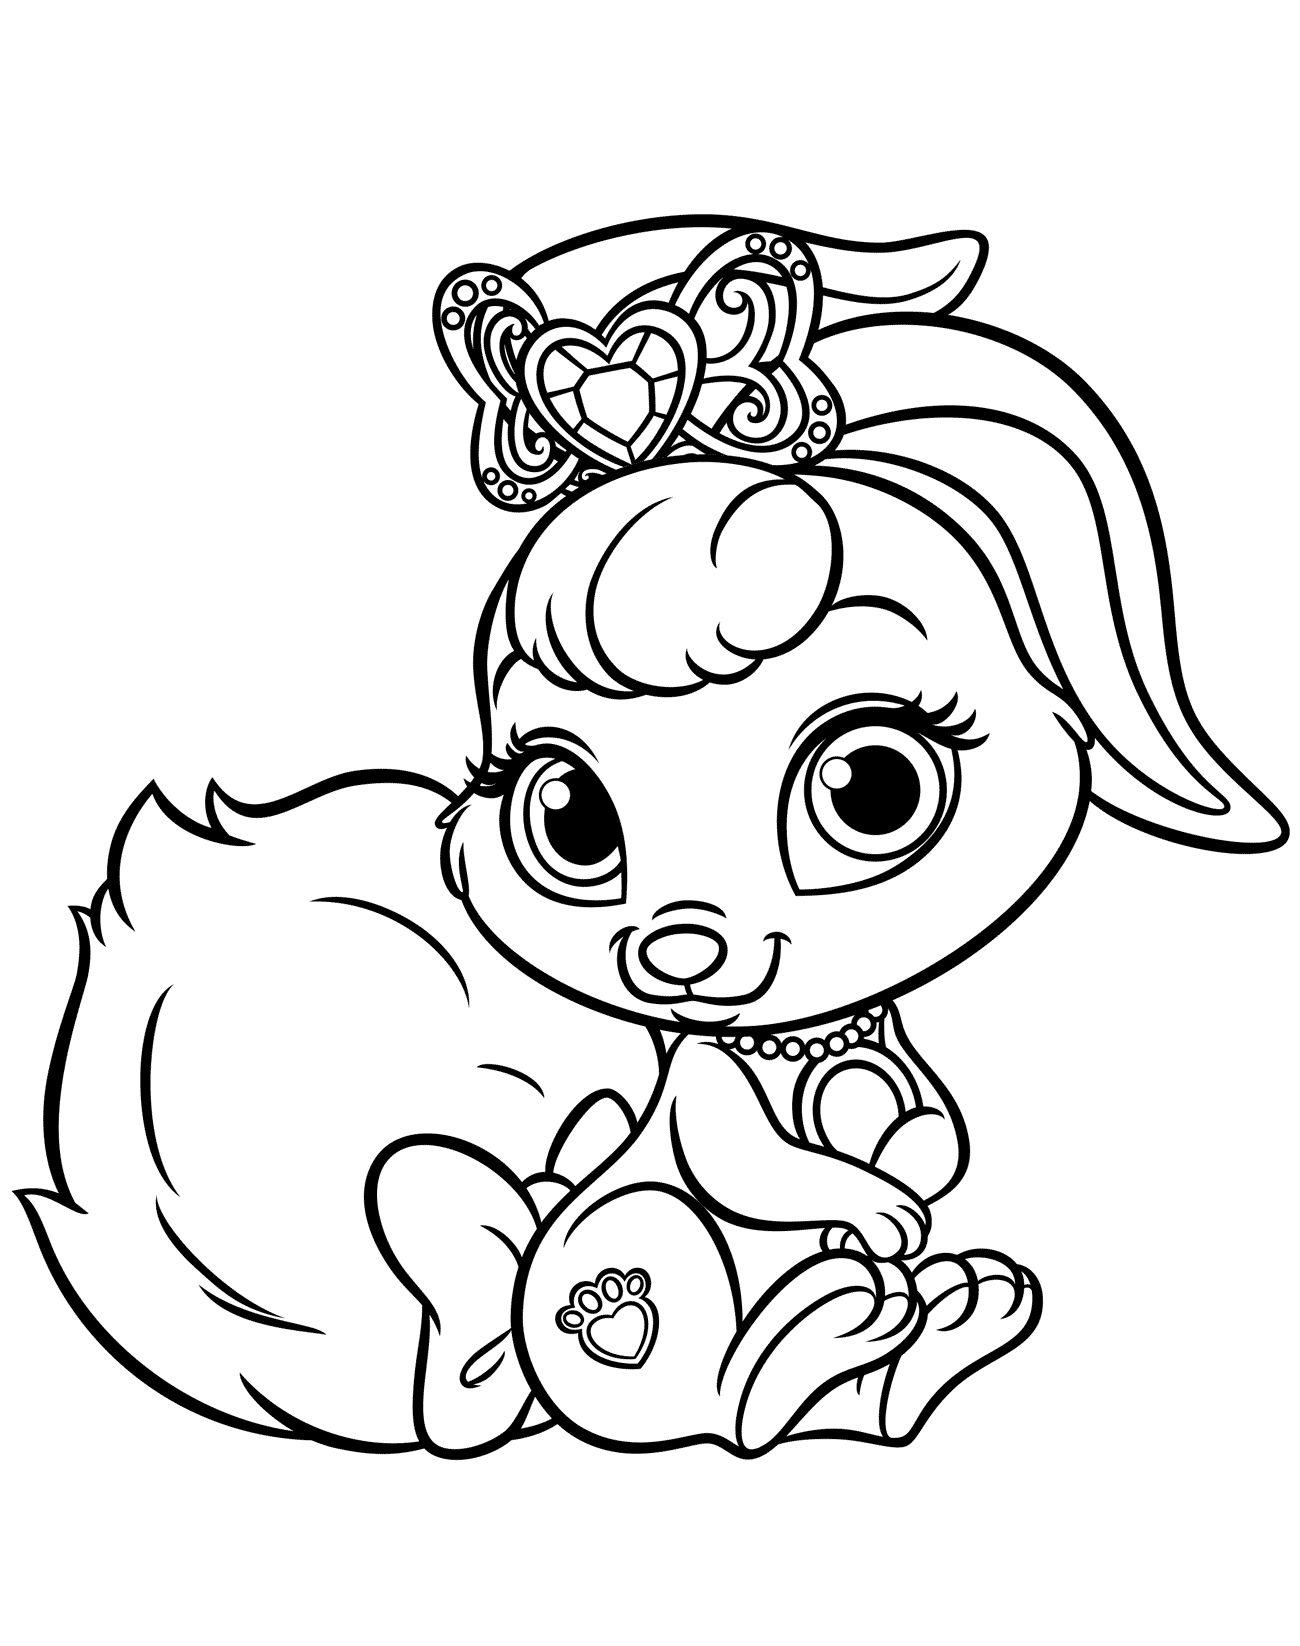 Download Coloring page - Bunny Berry